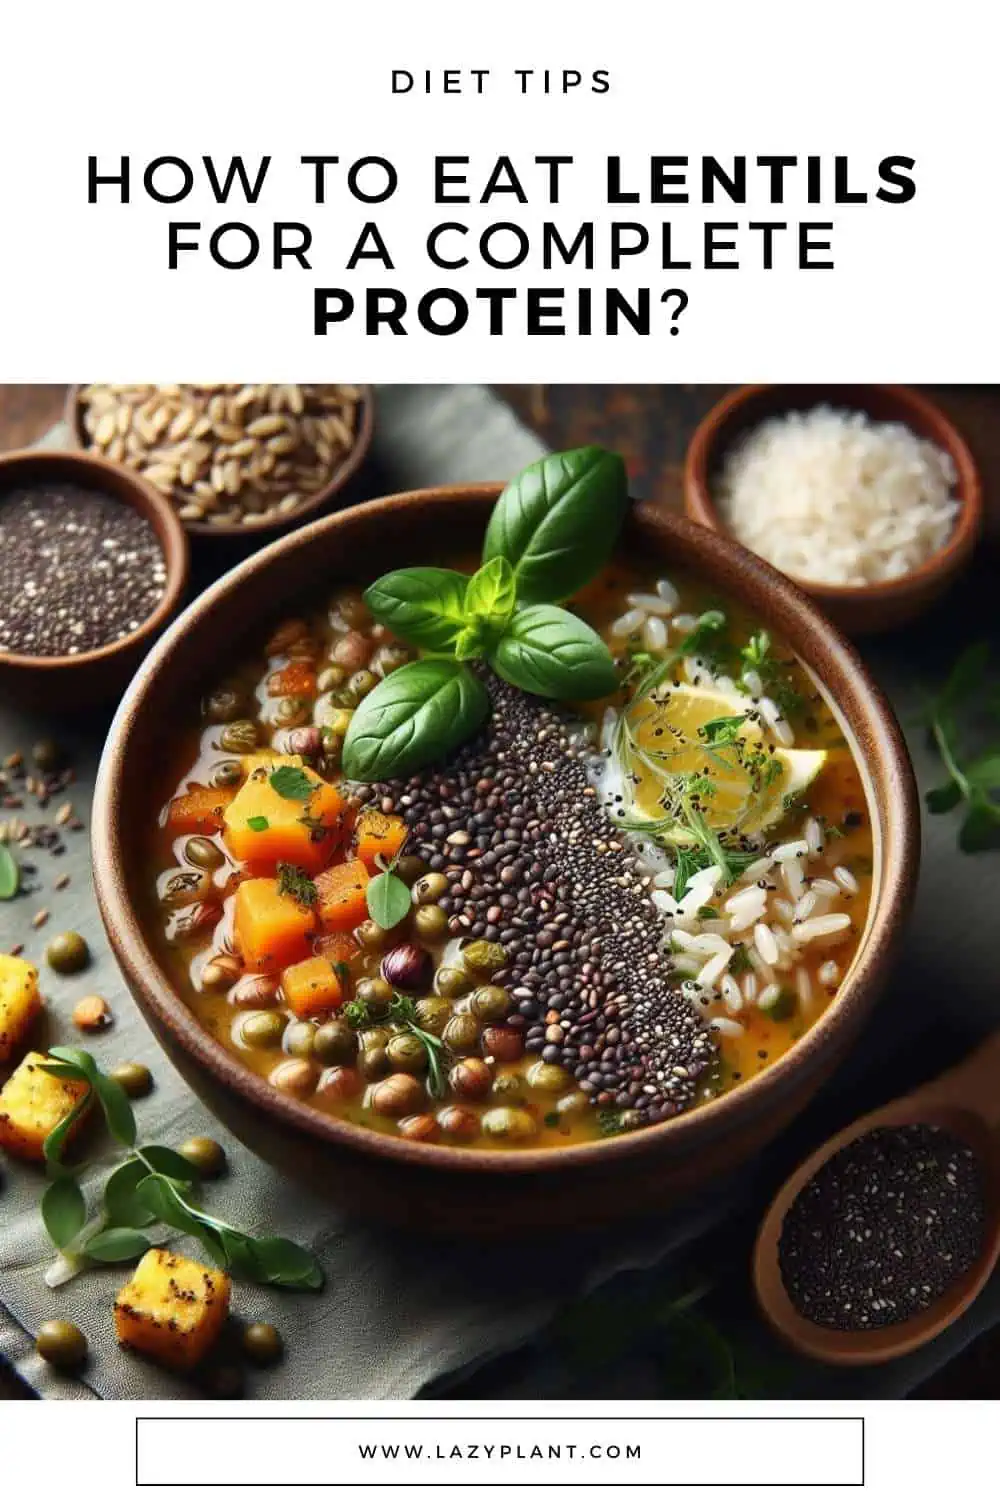 Diet Tips: Eating Lentils with cereals for protein.